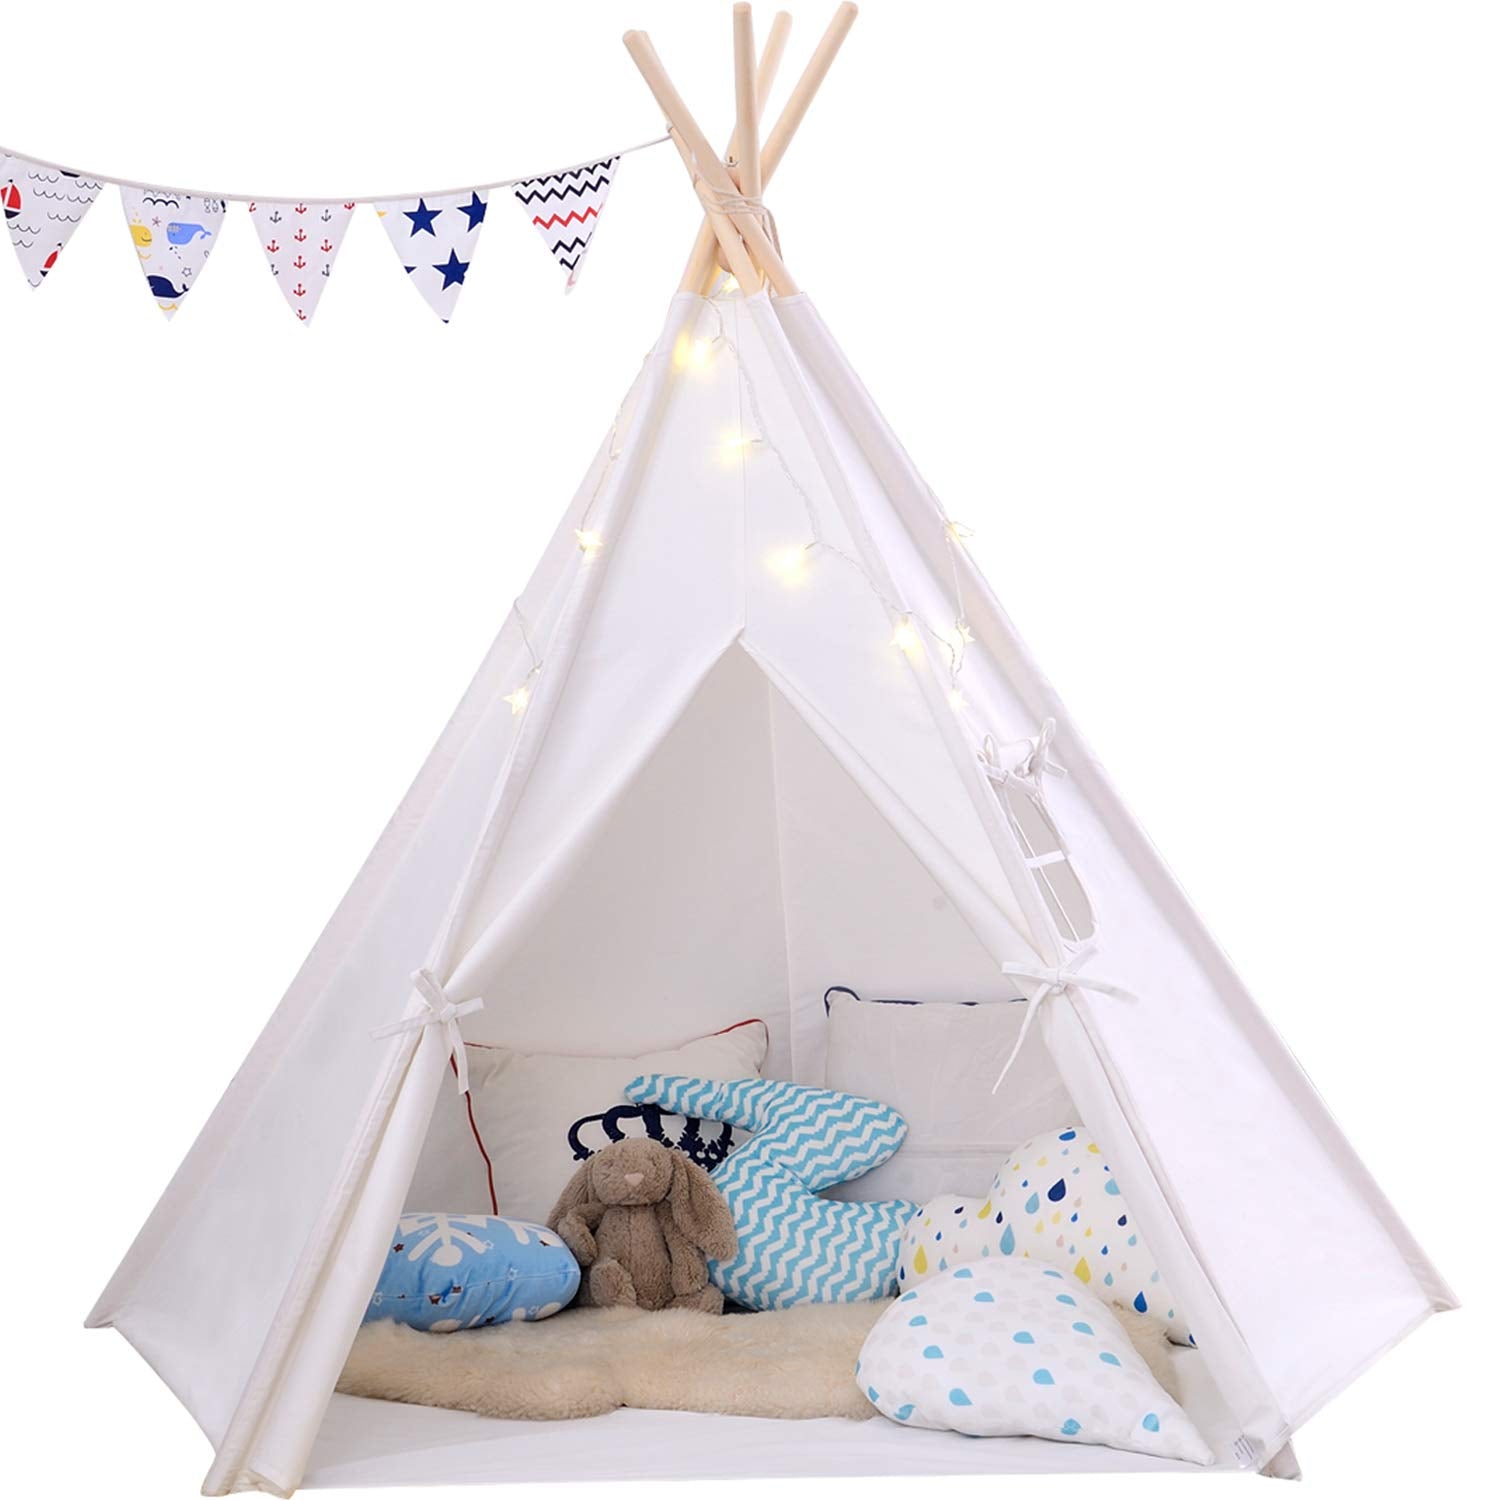 Large 5 Wooden Poles Teepee Kids Tent, 100% Cotton Tipi